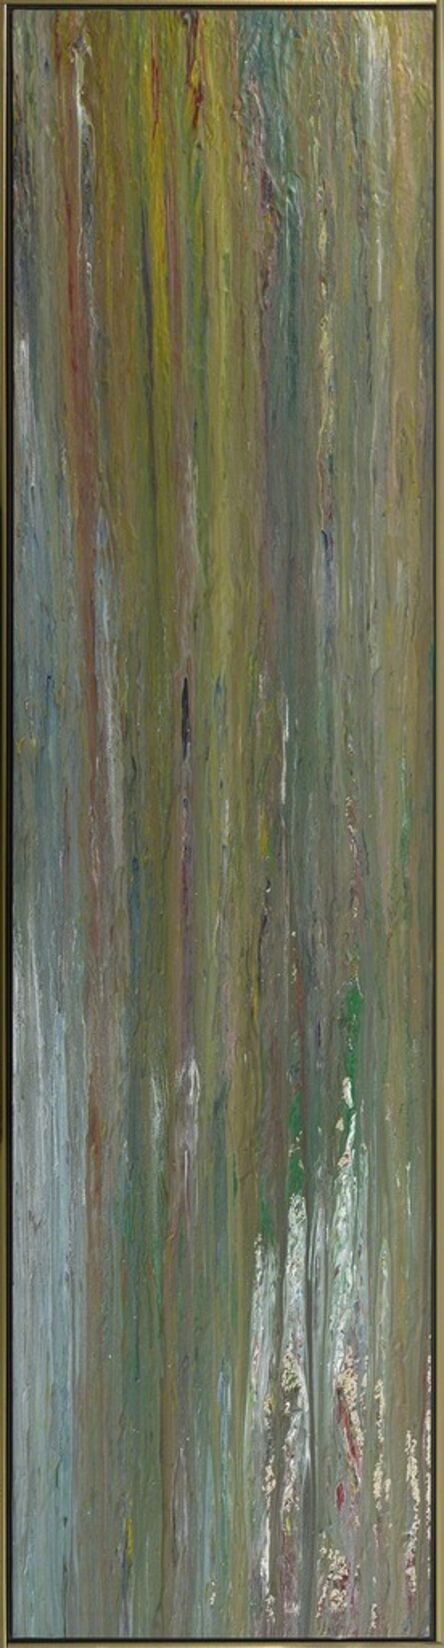 Larry Poons, ‘Untitled’, 1975